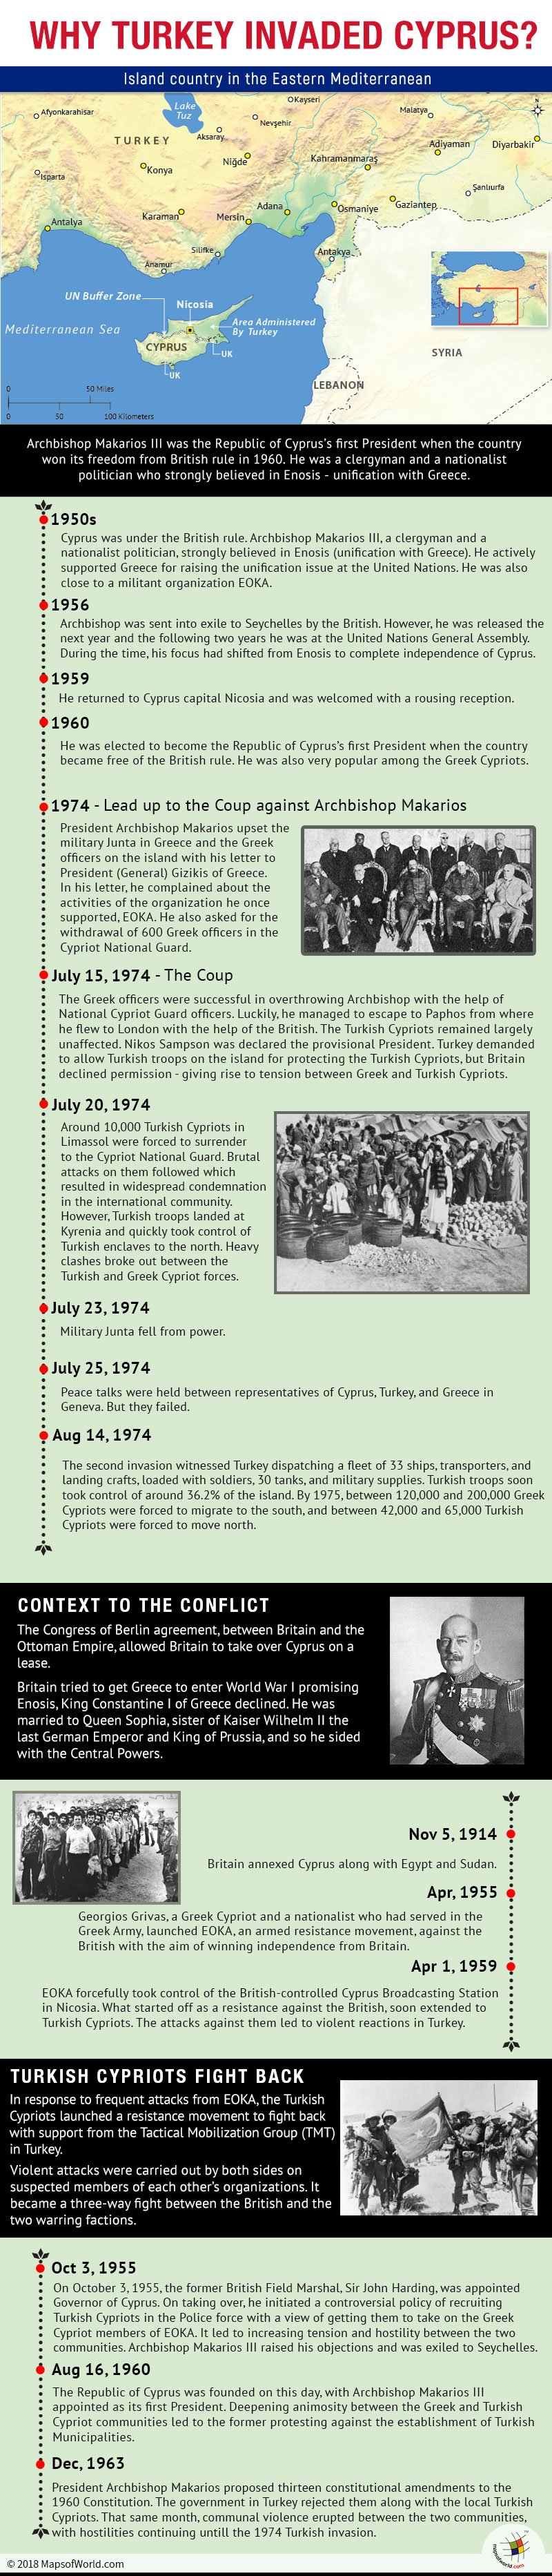 Infographic on Turkey Cyprus Conflict